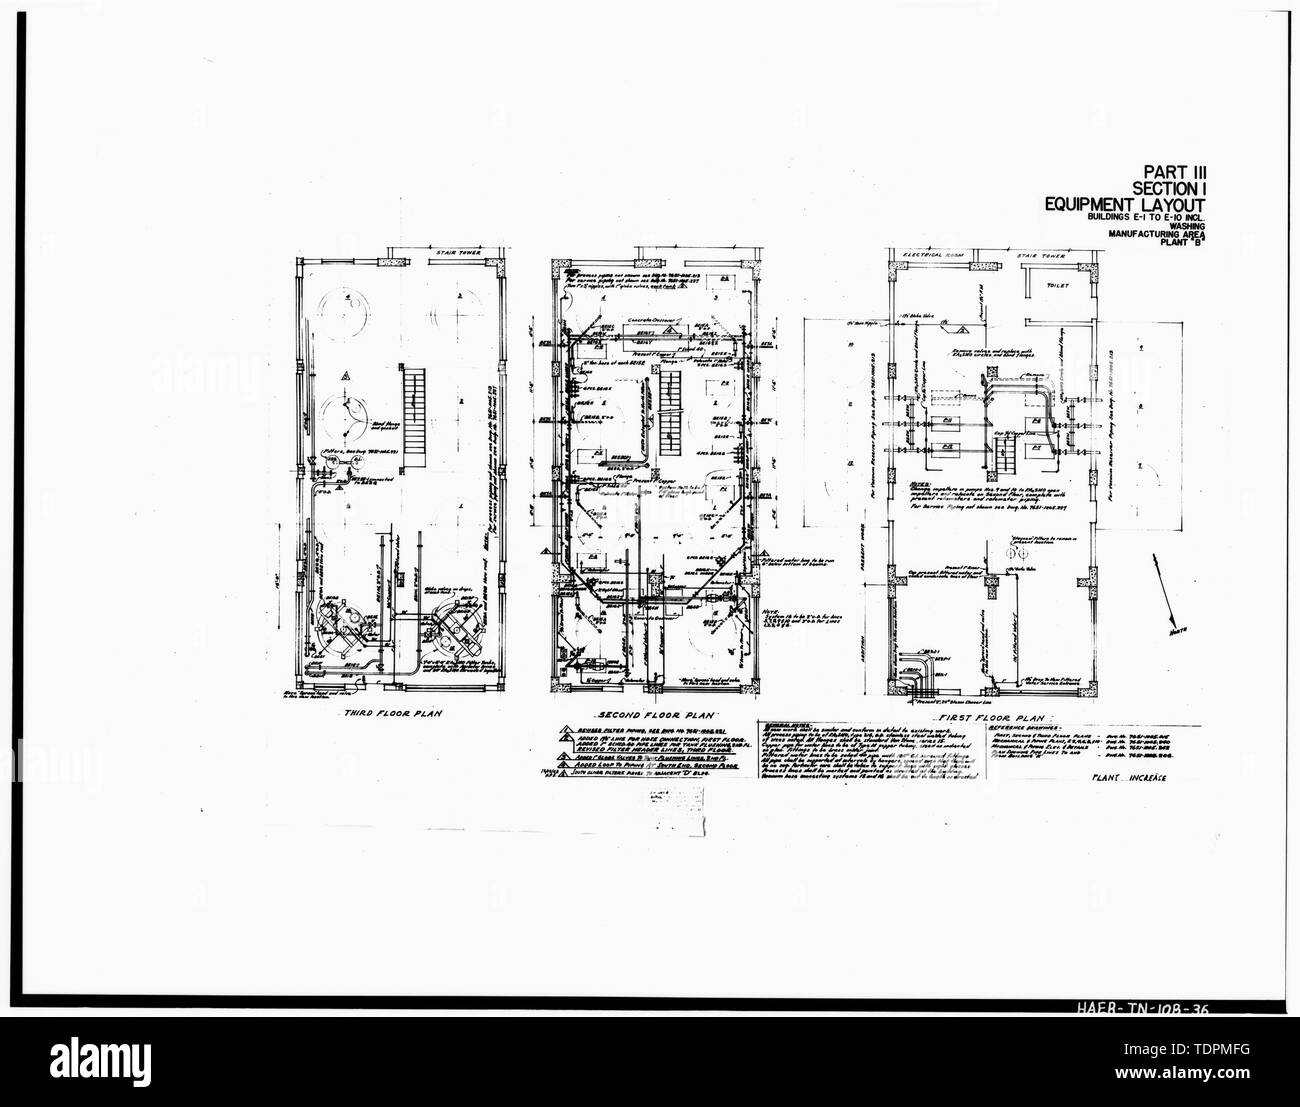 Photograph of a line drawing. '(PLAN LAYOUT OF) PART III, SECTION 1, EQUIPMENT LAYOUT, BUILDINGS E-1 TO E-10 INCL., WASHING, MANUFACTURING AREA PLANT 'B'.' From the U.S. Army Corps of Engineers. Industrial Facilities Inventory, Holston Ordnance Works, Kingsport, Tennessee. Plant B, Parts II, III. (Nashville, TN- Office of the District Engineer, 1944). - Holston Army Ammunition Plant, RDX-and-Composition-B Manufacturing Line 9, Kingsport, Sullivan County, TN; Bachmann                              , Werner E; Tennessee Eastman Corporation; U.S. Department of the Army; National Defense Research C Stock Photo